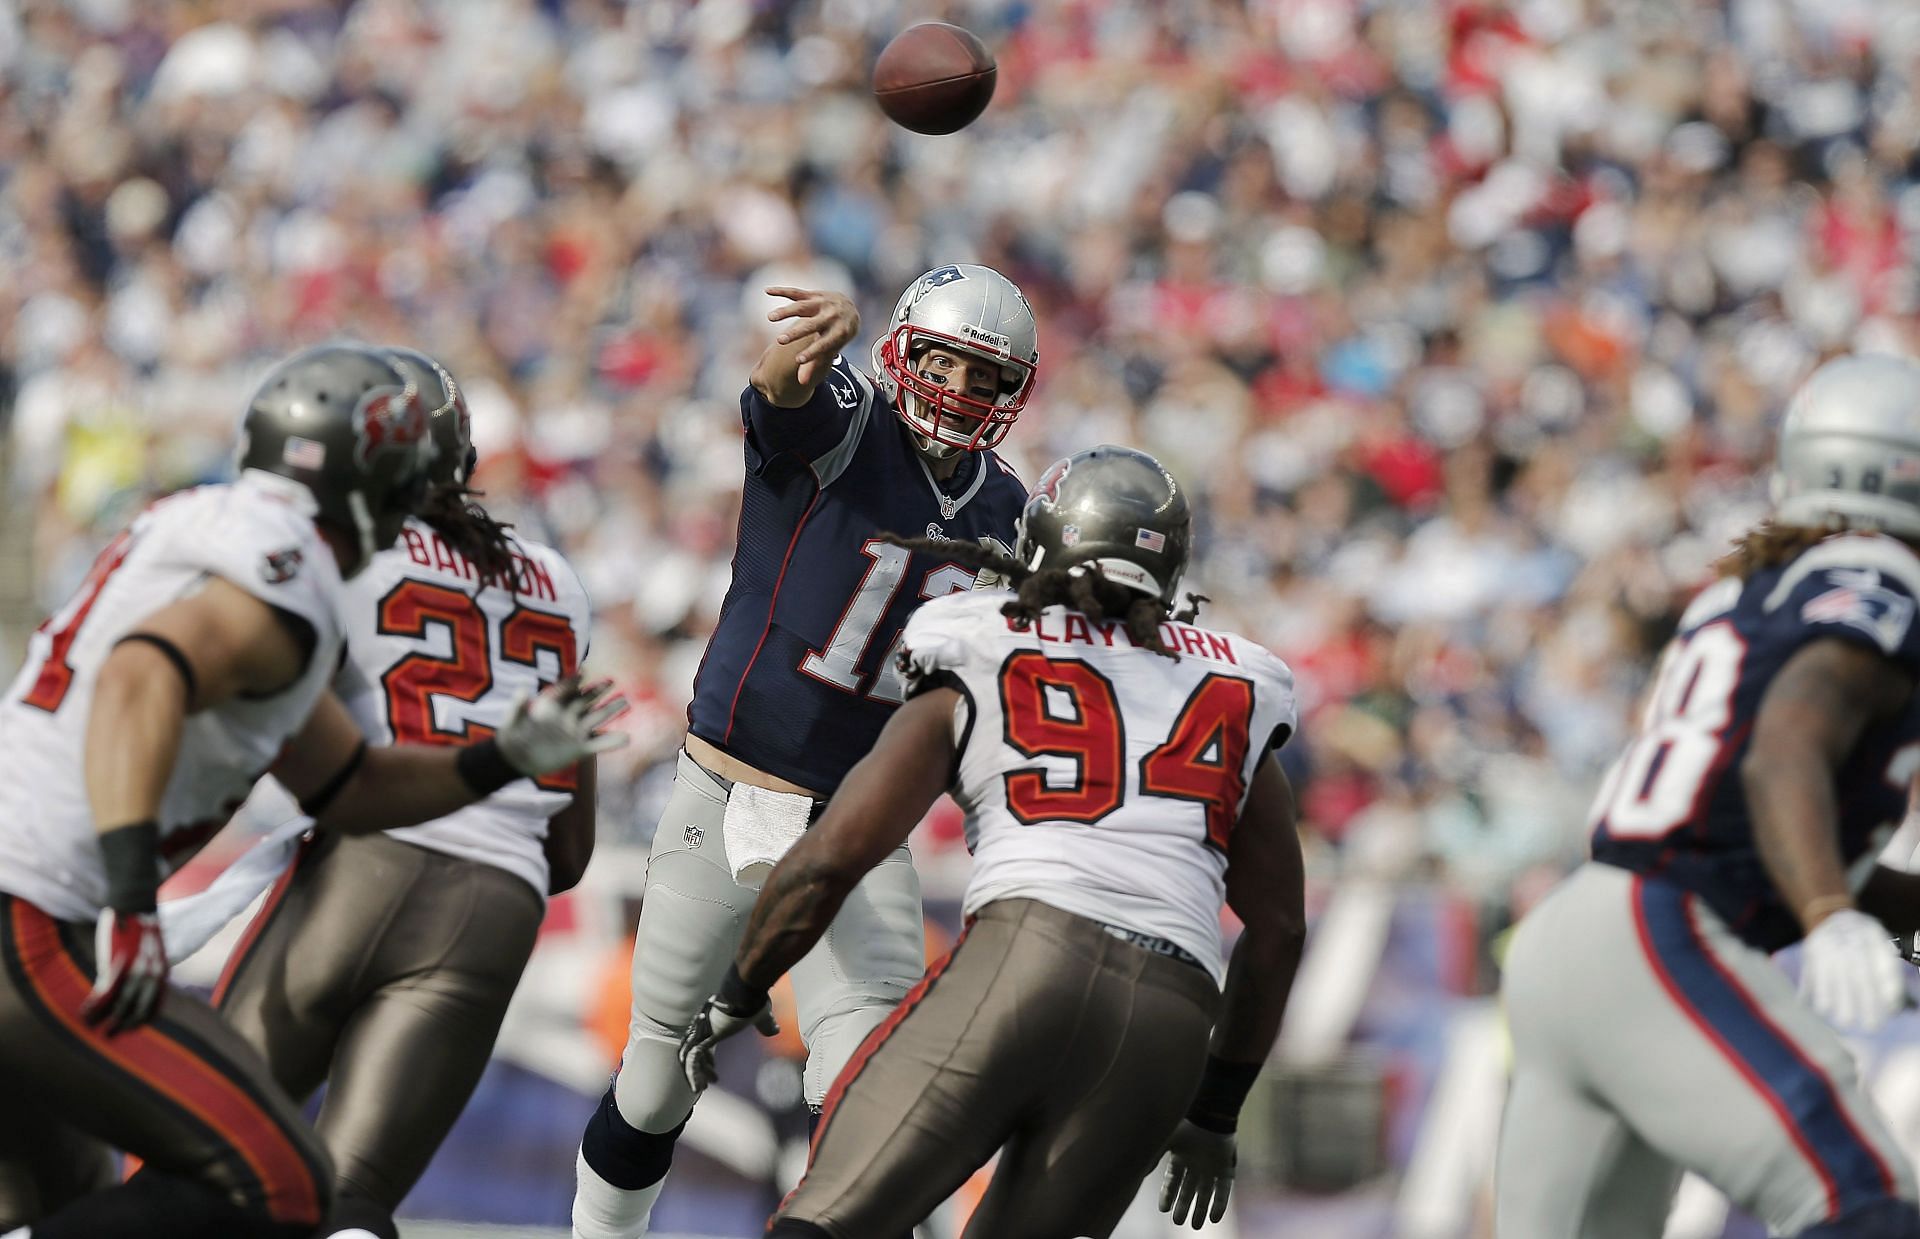 Brady releases a pass against the Tampa Bay Buccaneers